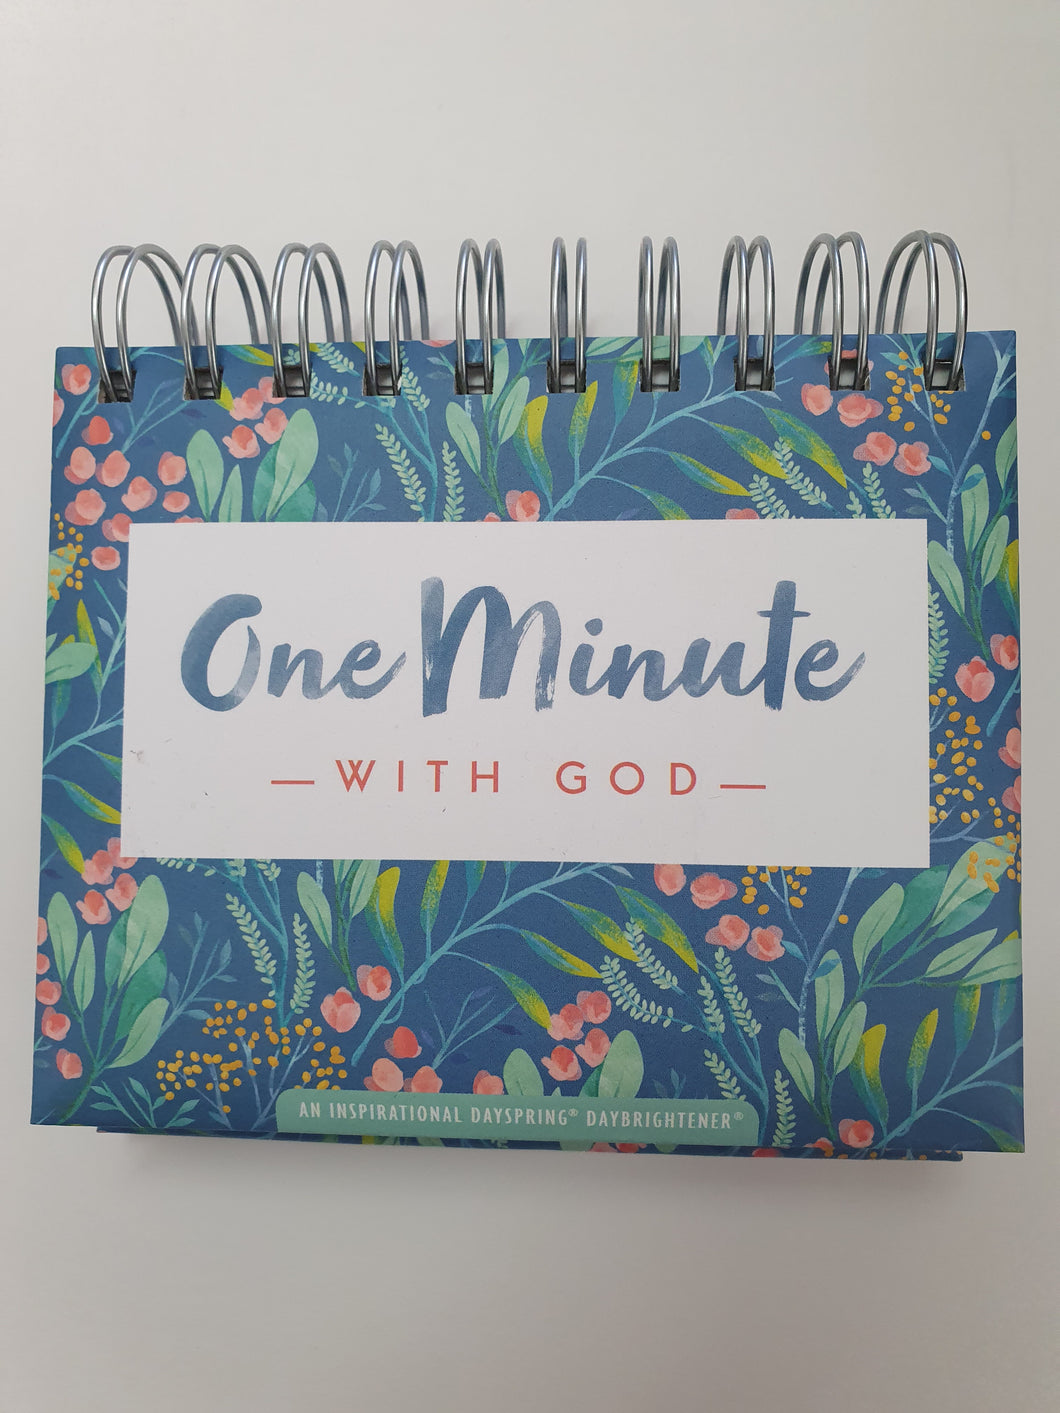 Daybrightener: One Minute with God